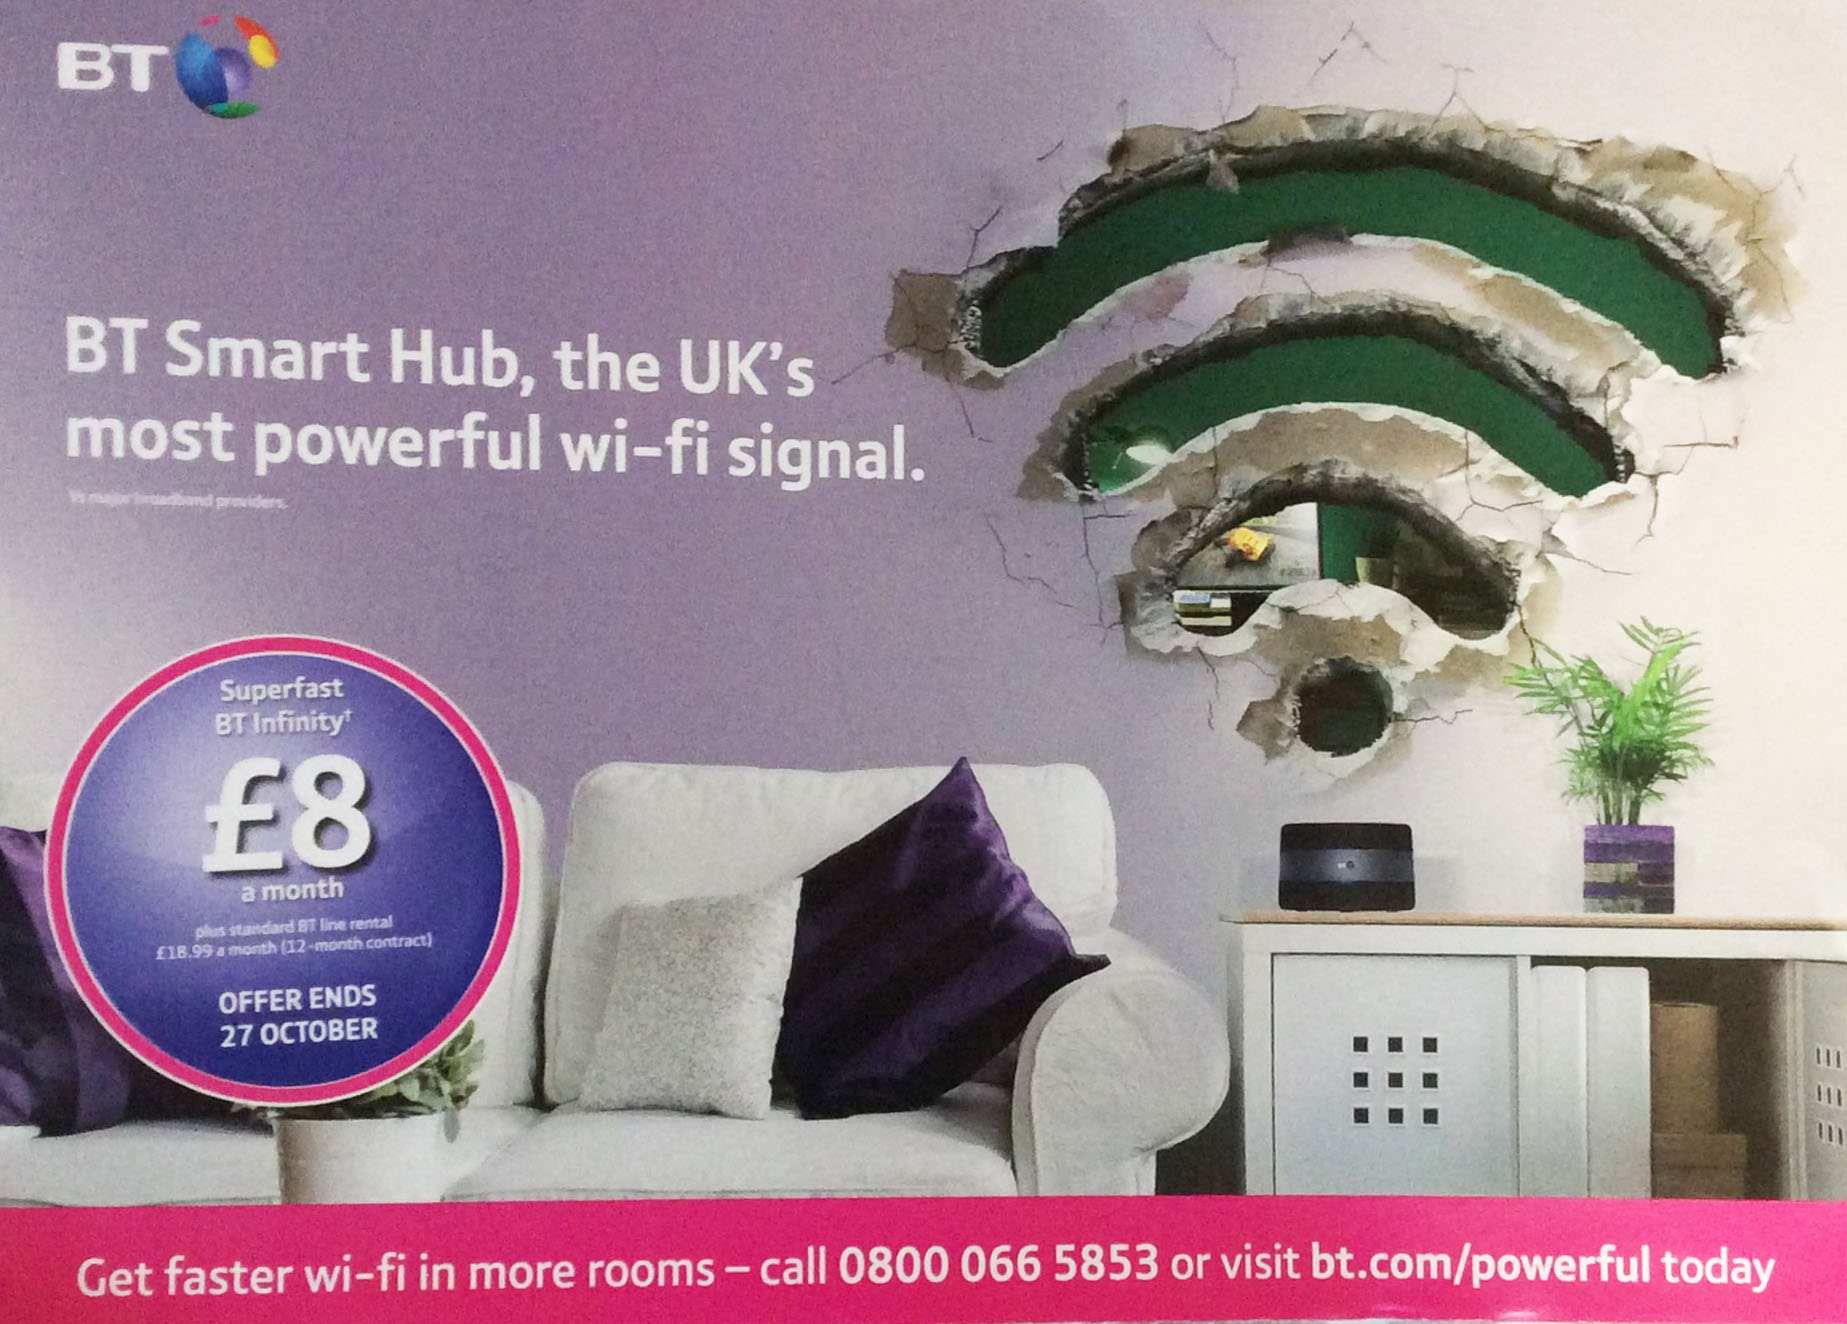 The Front Page of the 'BT' Flyer